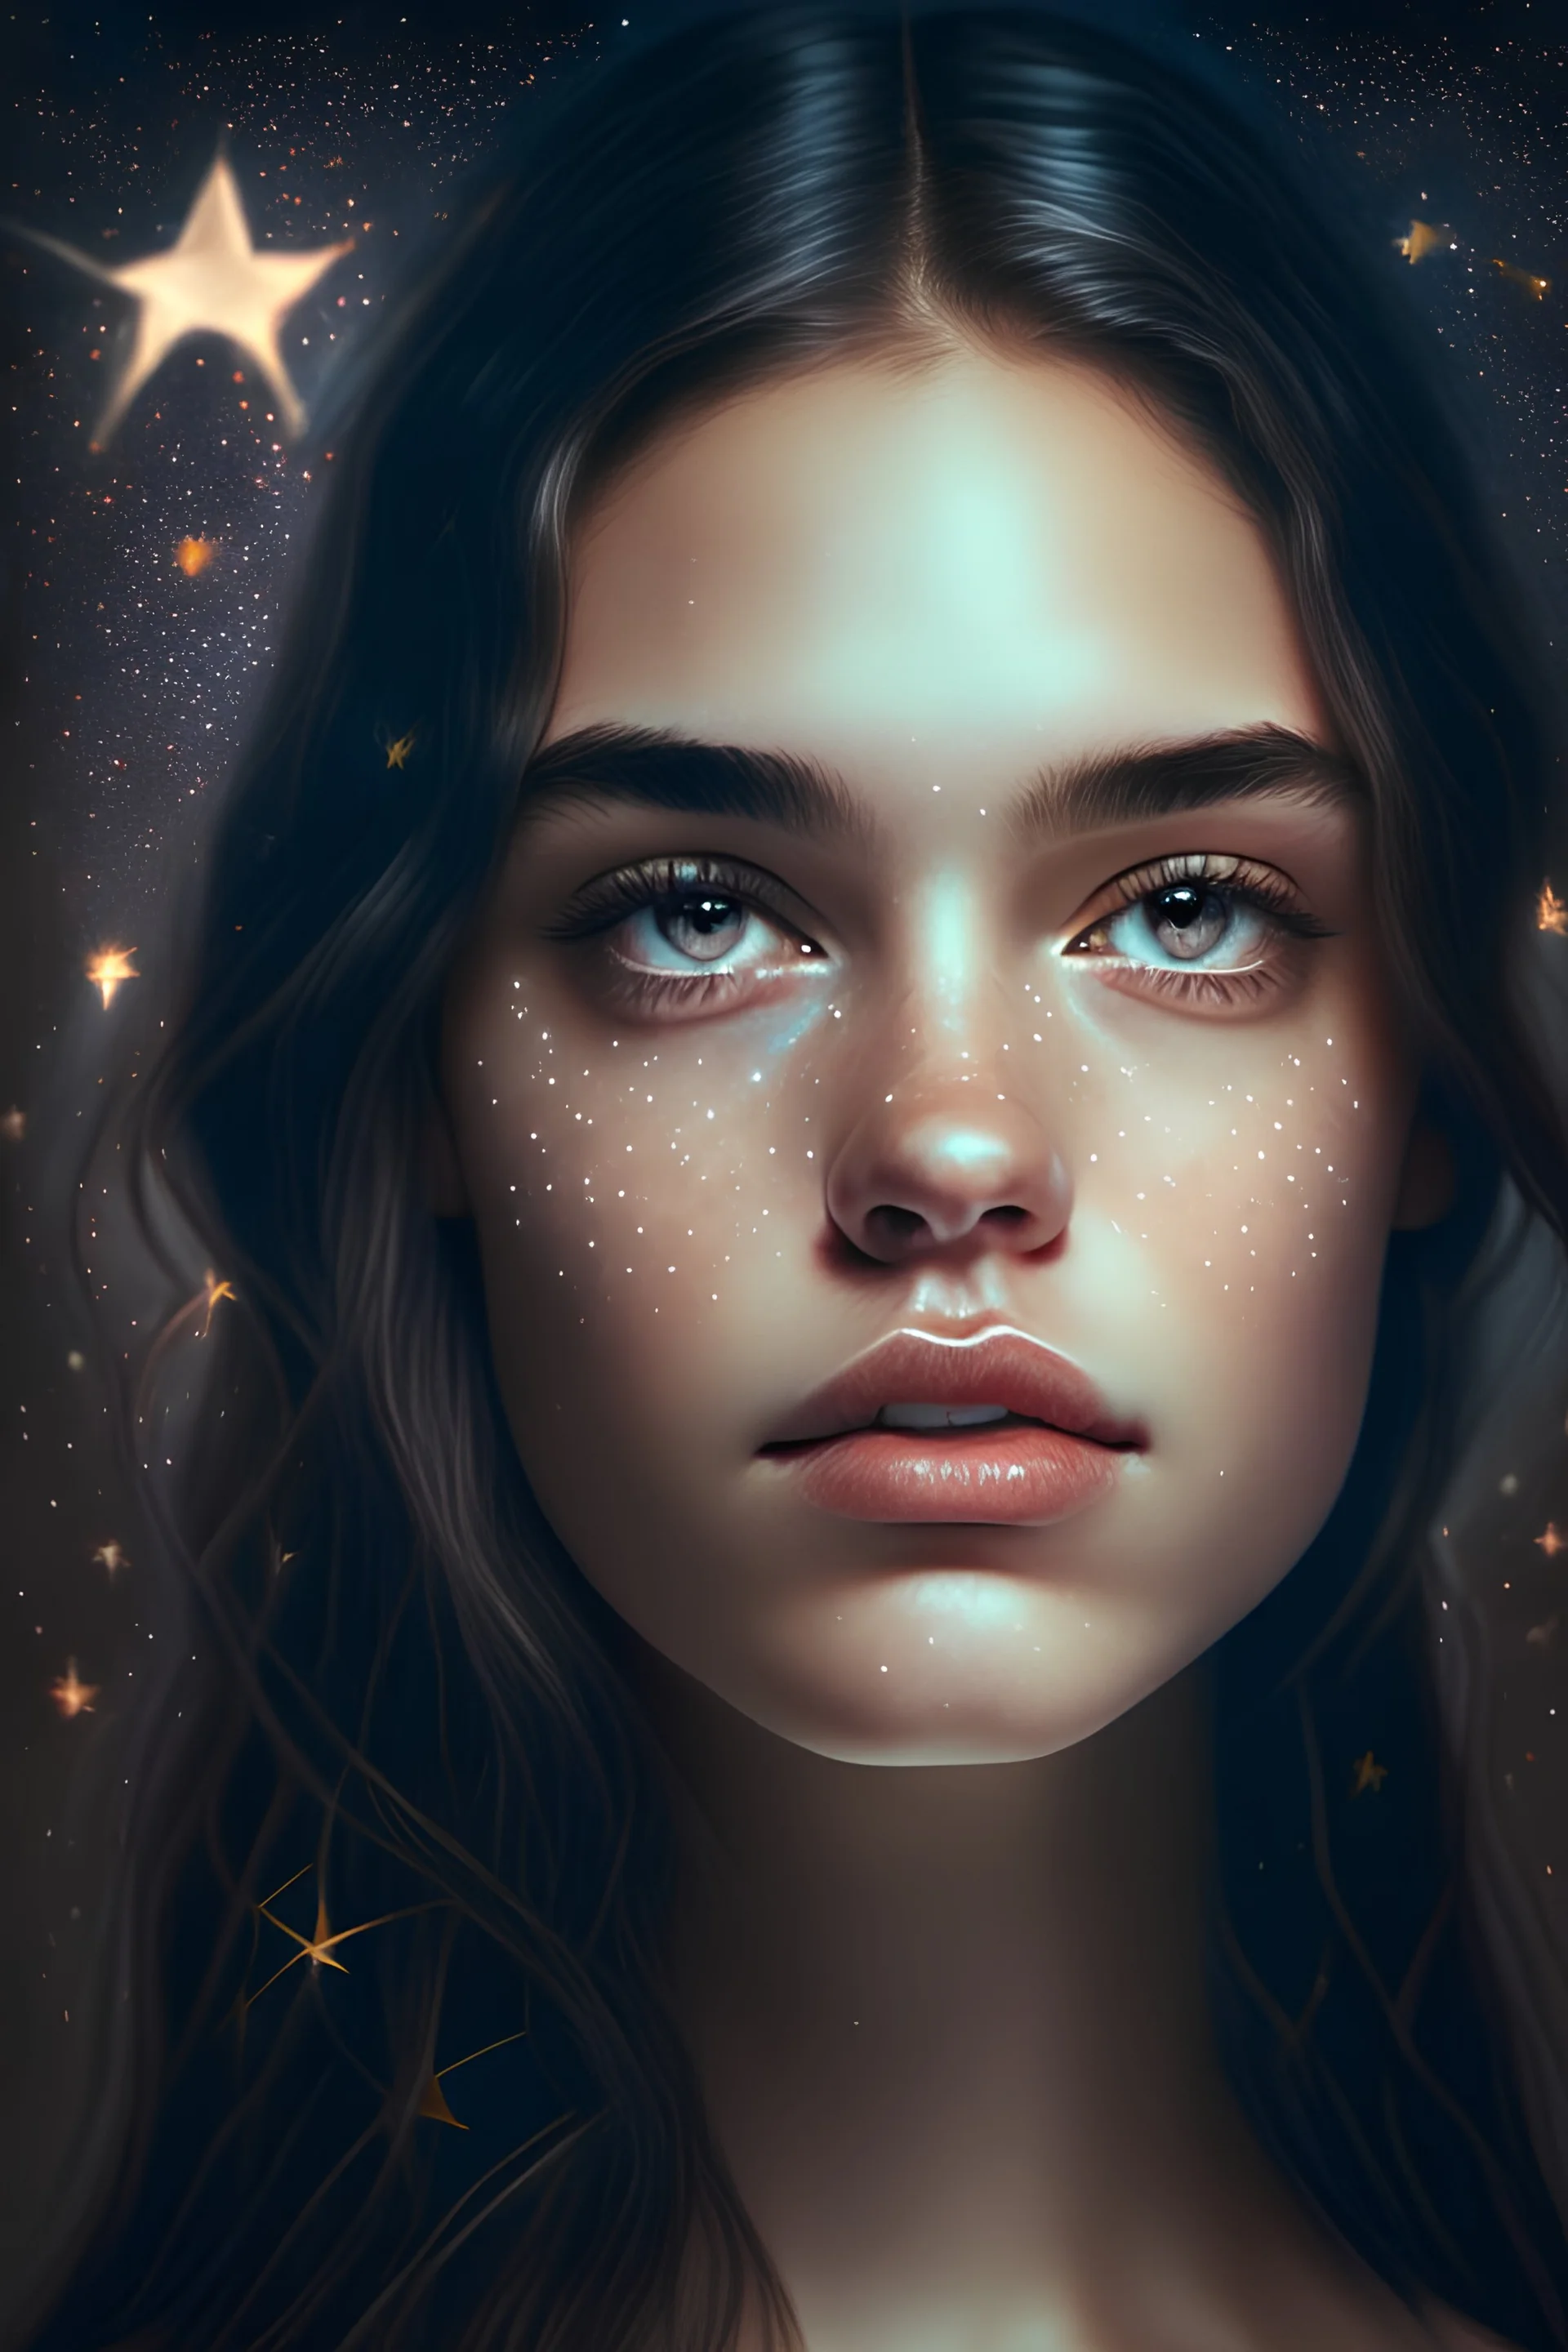 A very beautiful and attractive girl with a symmetrical face, with stars behind her